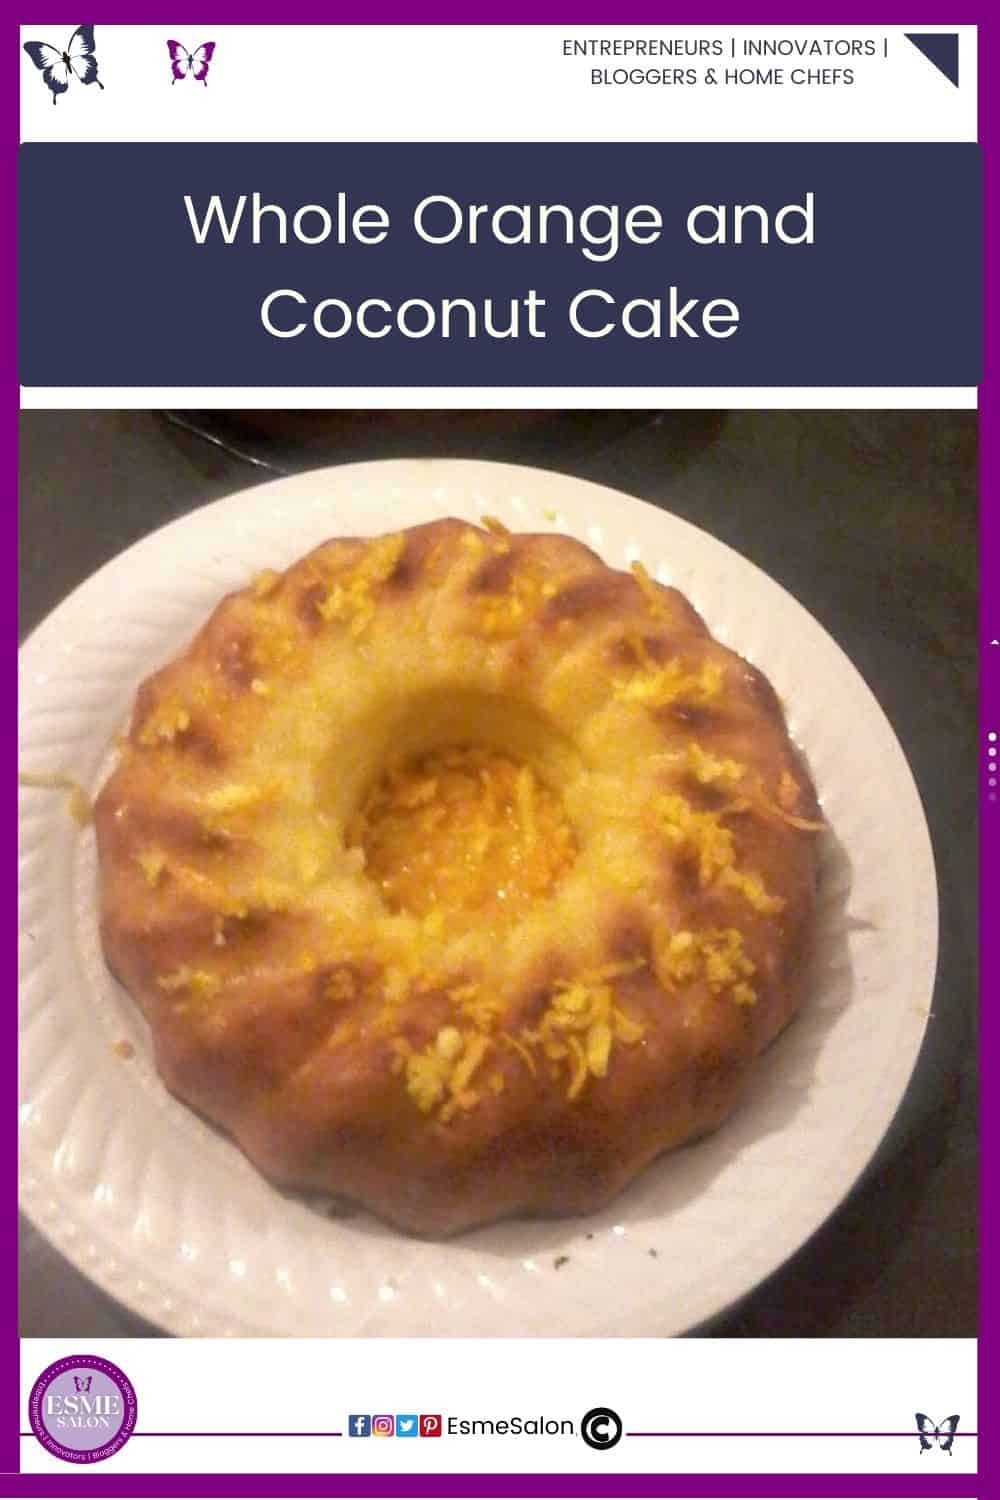 an image of a round Bundt style Whole Orange and Coconut Cake on a while plate with grated lemon